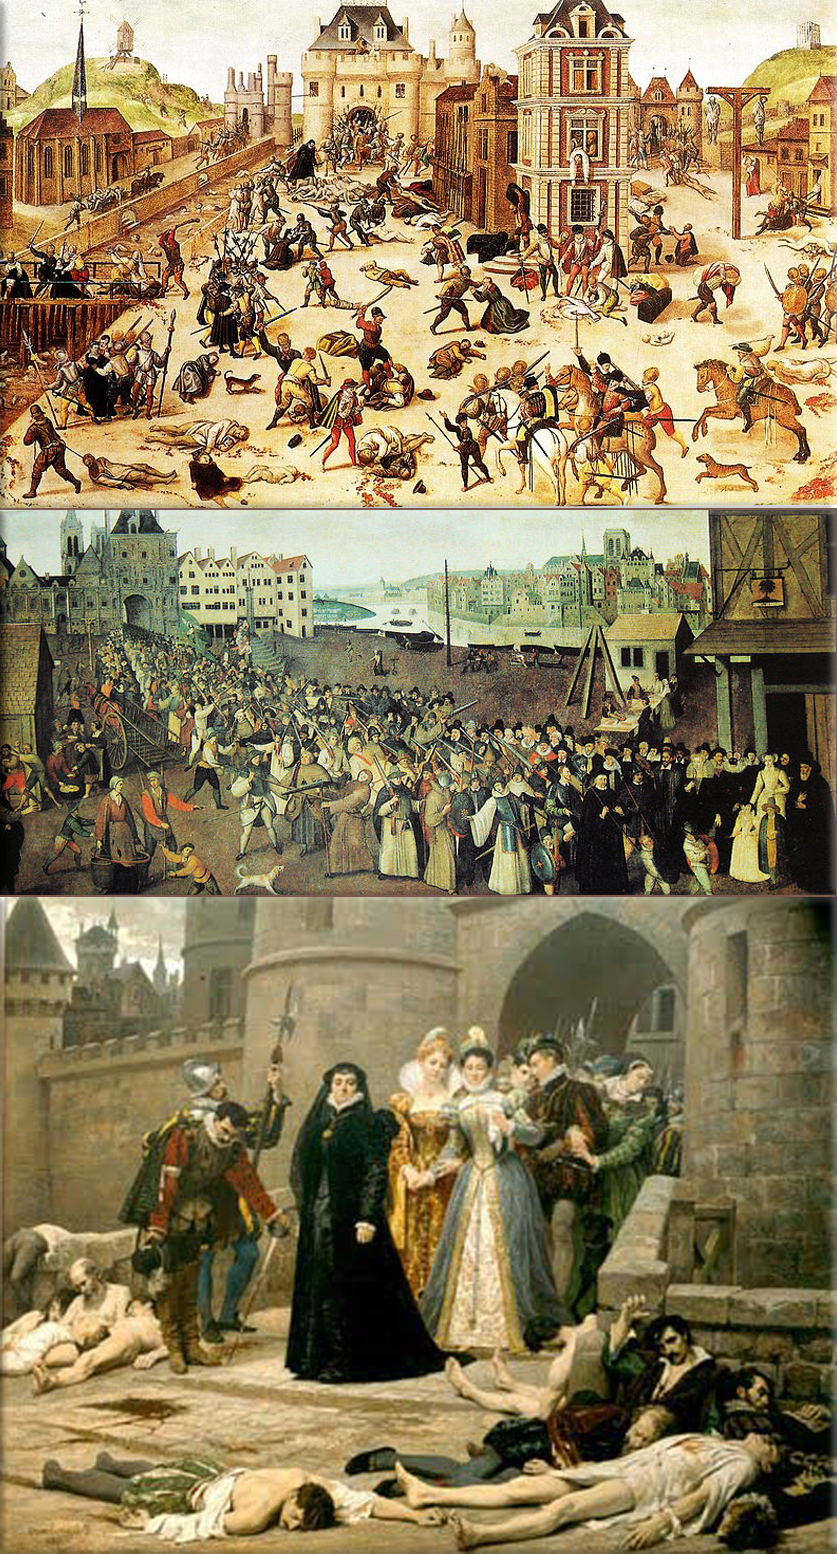 The French Wars of Religion (1562–98): Period of civil infighting and military operations, primarily fought between French Catholics and Protestants (Huguenots) (The conflict involved the factional disputes between the aristocratic houses of France, such as the House of Bourbon and House of Guise (Lorraine), and both sides received assistance from foreign sources)